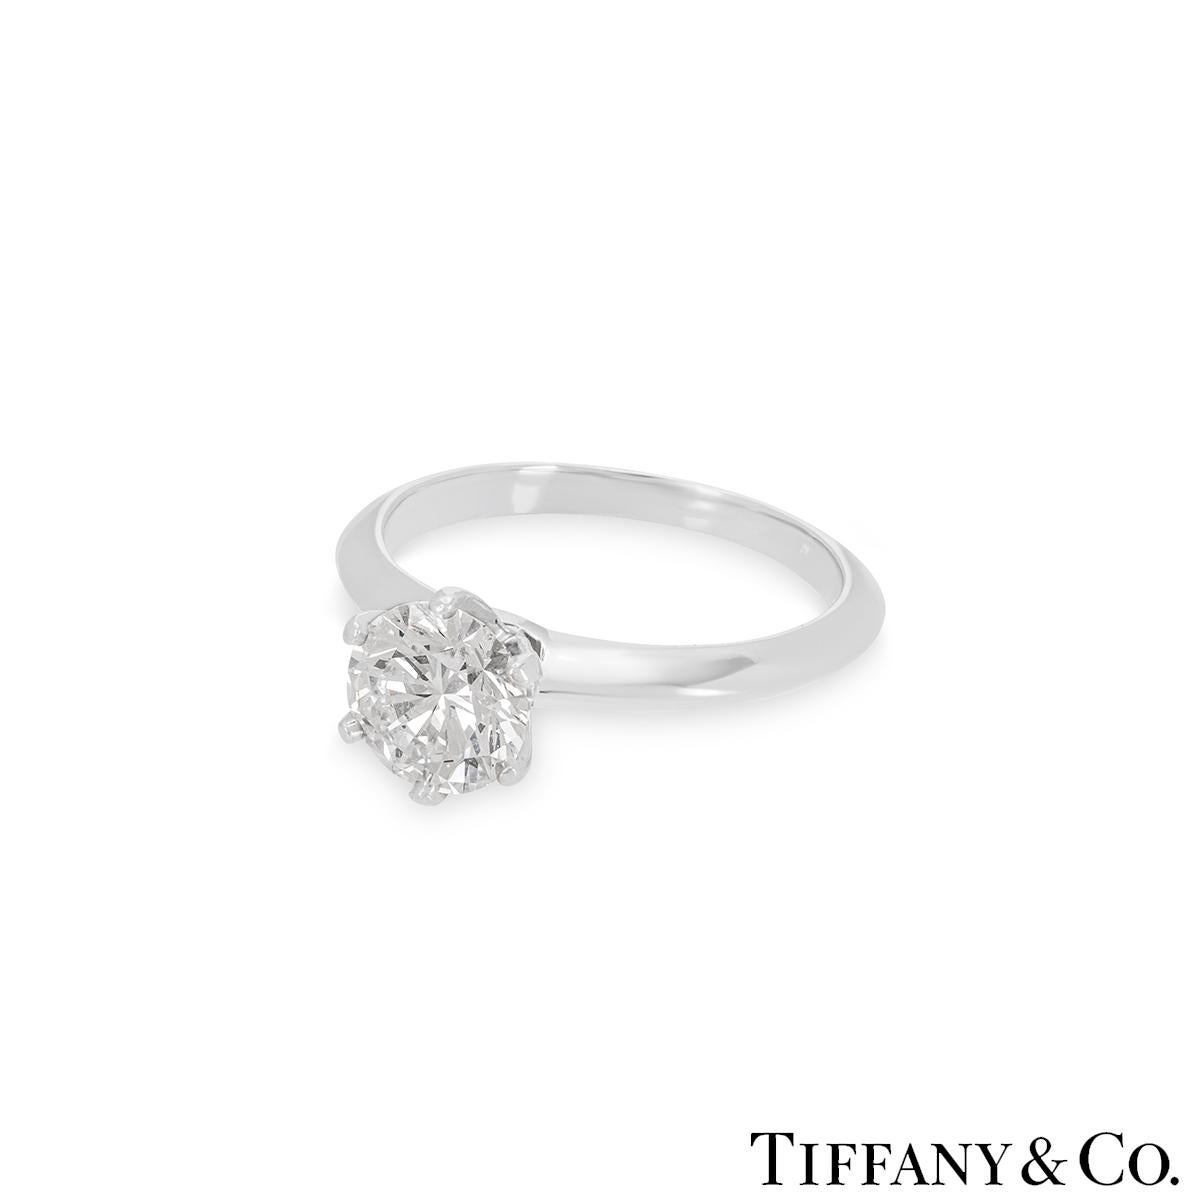 GIA Certified Tiffany & Co. Platinum Diamond Setting Ring 1.09ct D/IF In Good Condition For Sale In London, GB